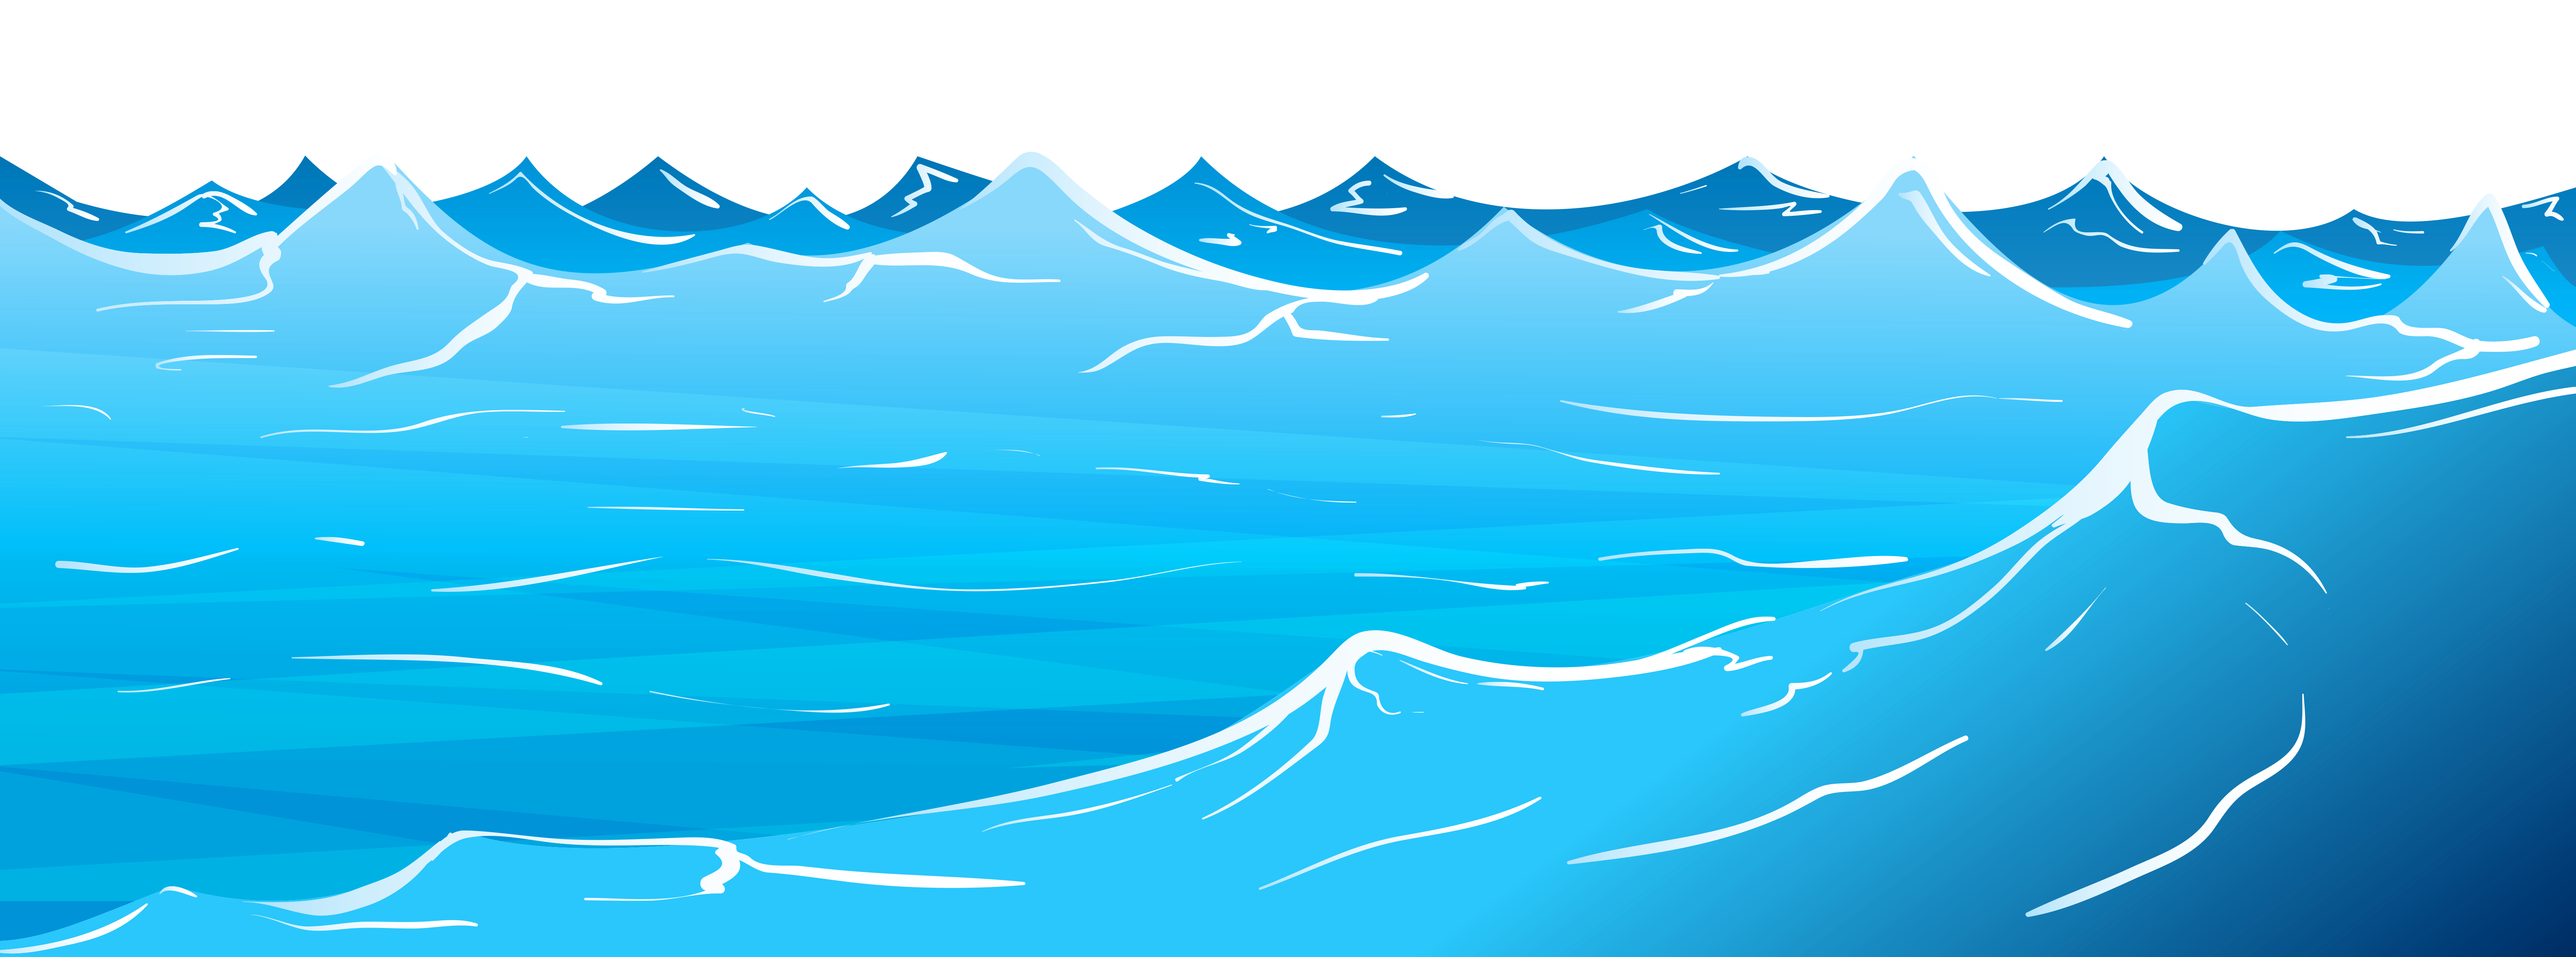 Sea PNG images Download